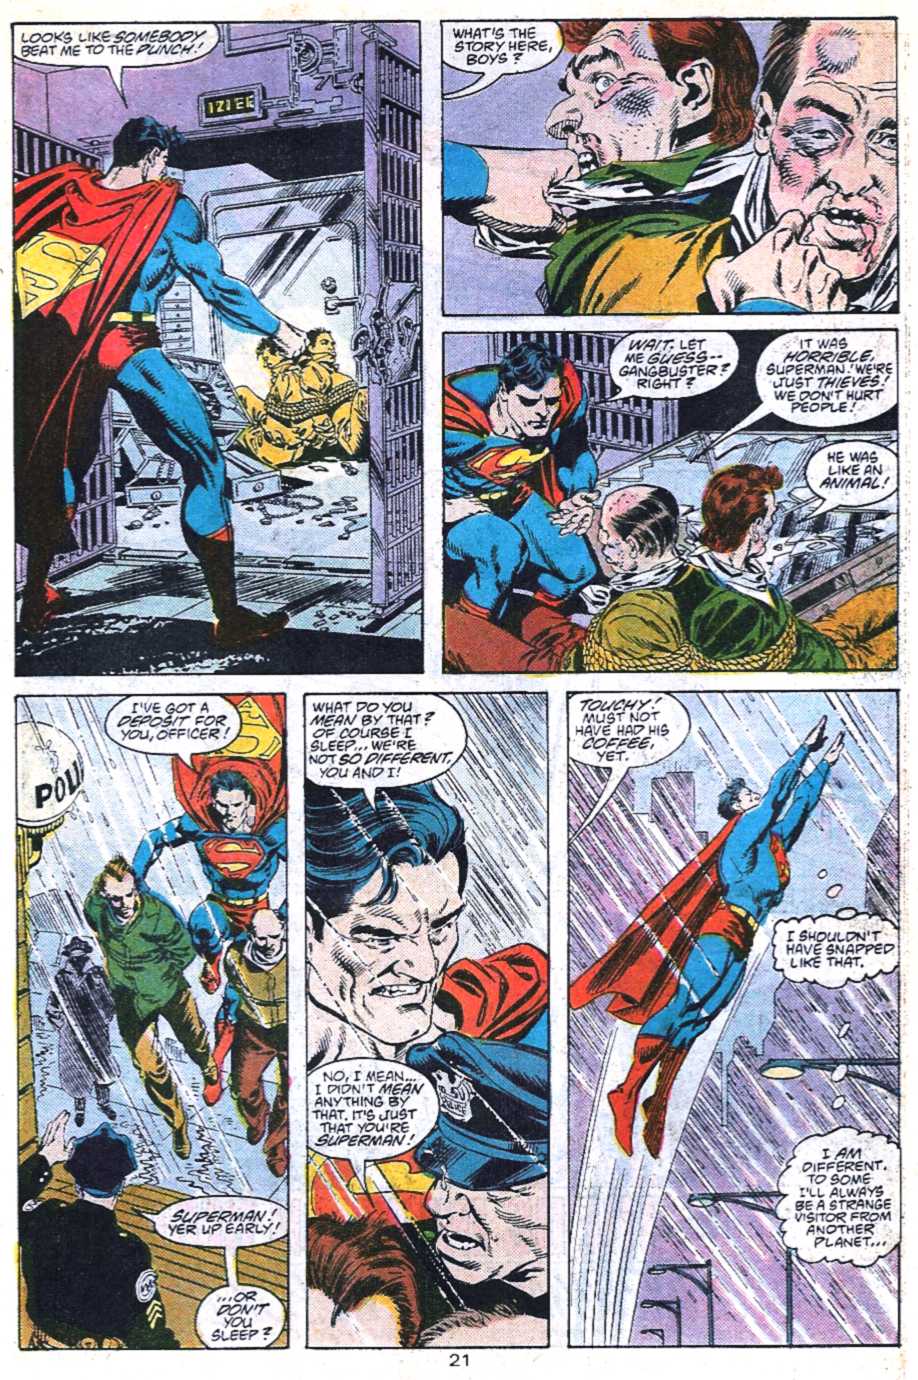 Adventures of Superman (1987) 448 Page 21